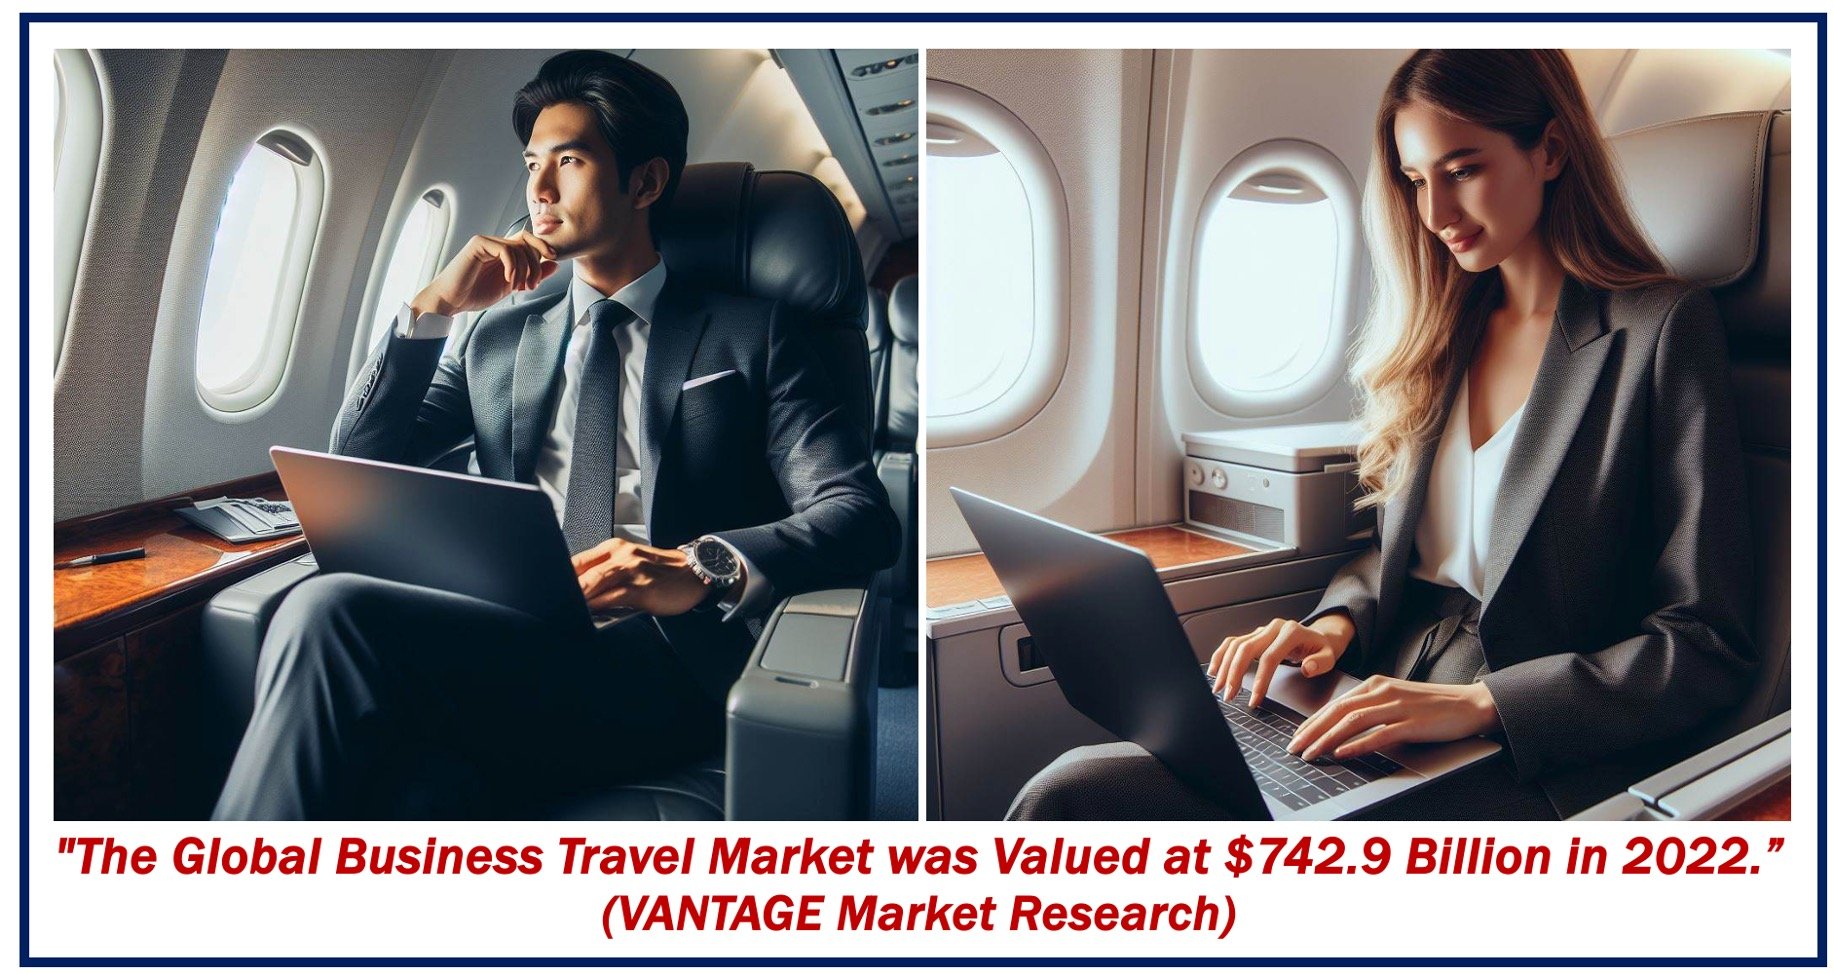 Man and a woman on a business trip, plus info about size of business travel market.